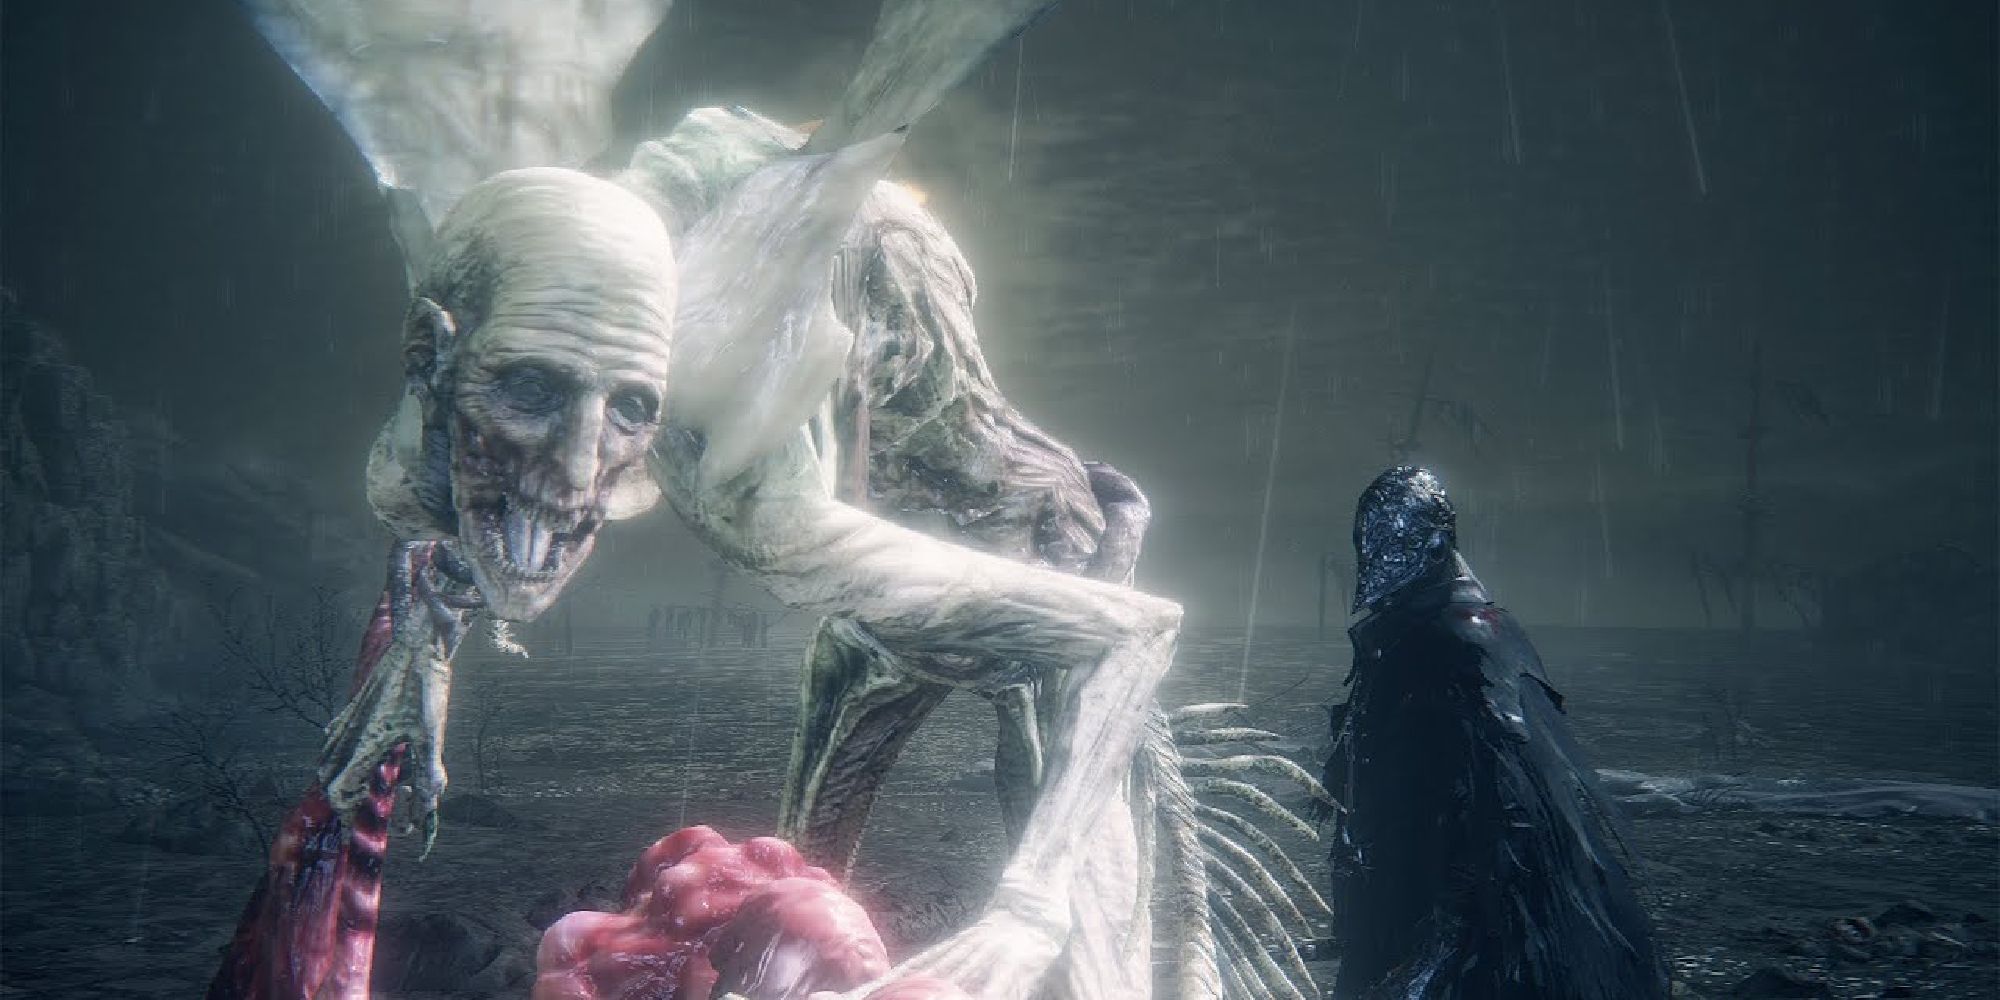 The orphan of kos boss from Bloodborne. 